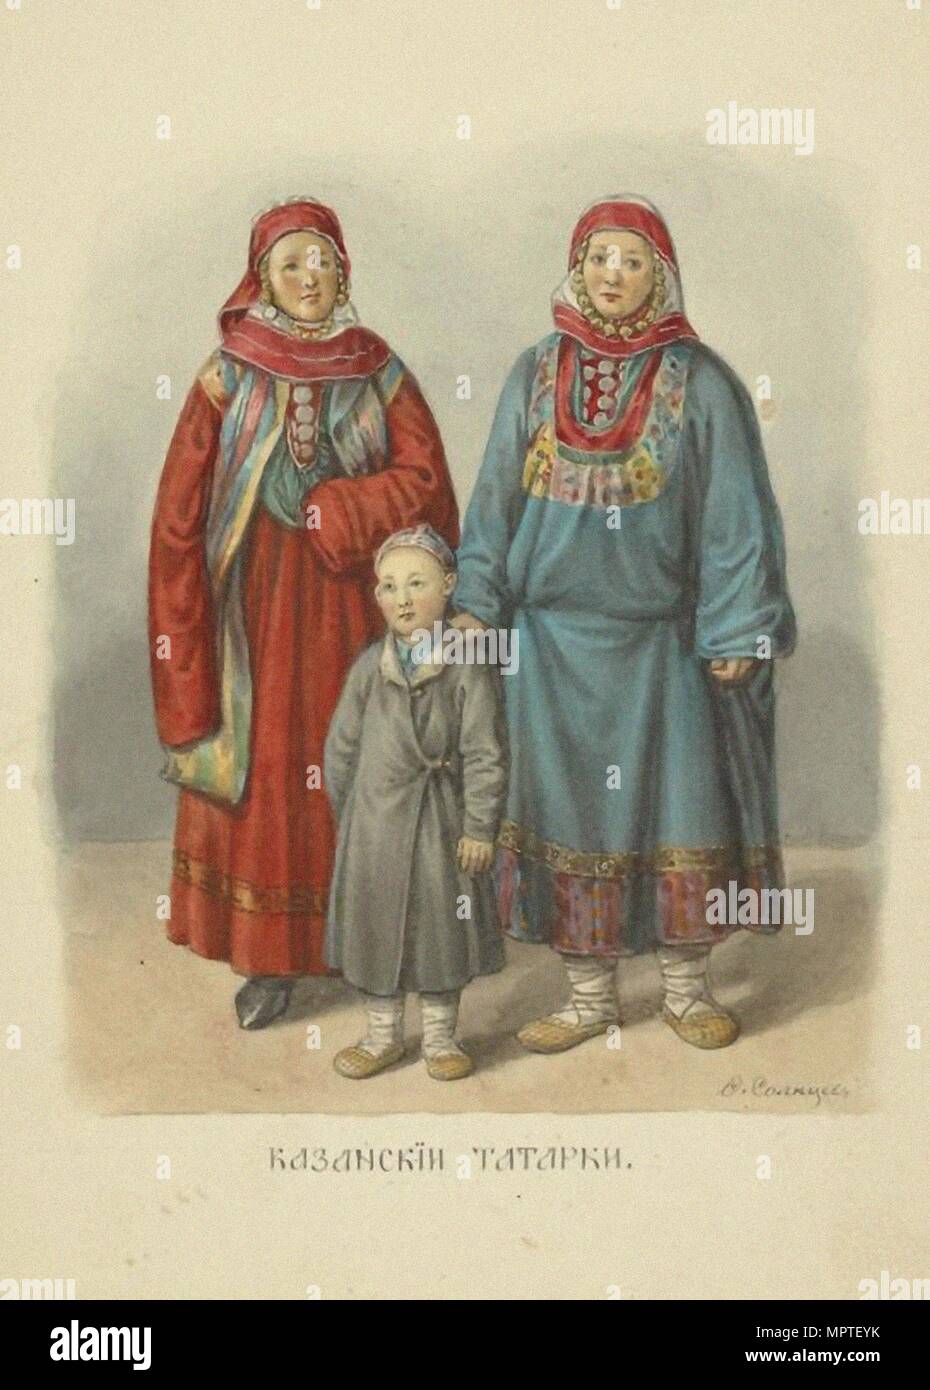 Kazan Tatar Women (From the series Clothing of the Russian state), 1869. Stock Photo